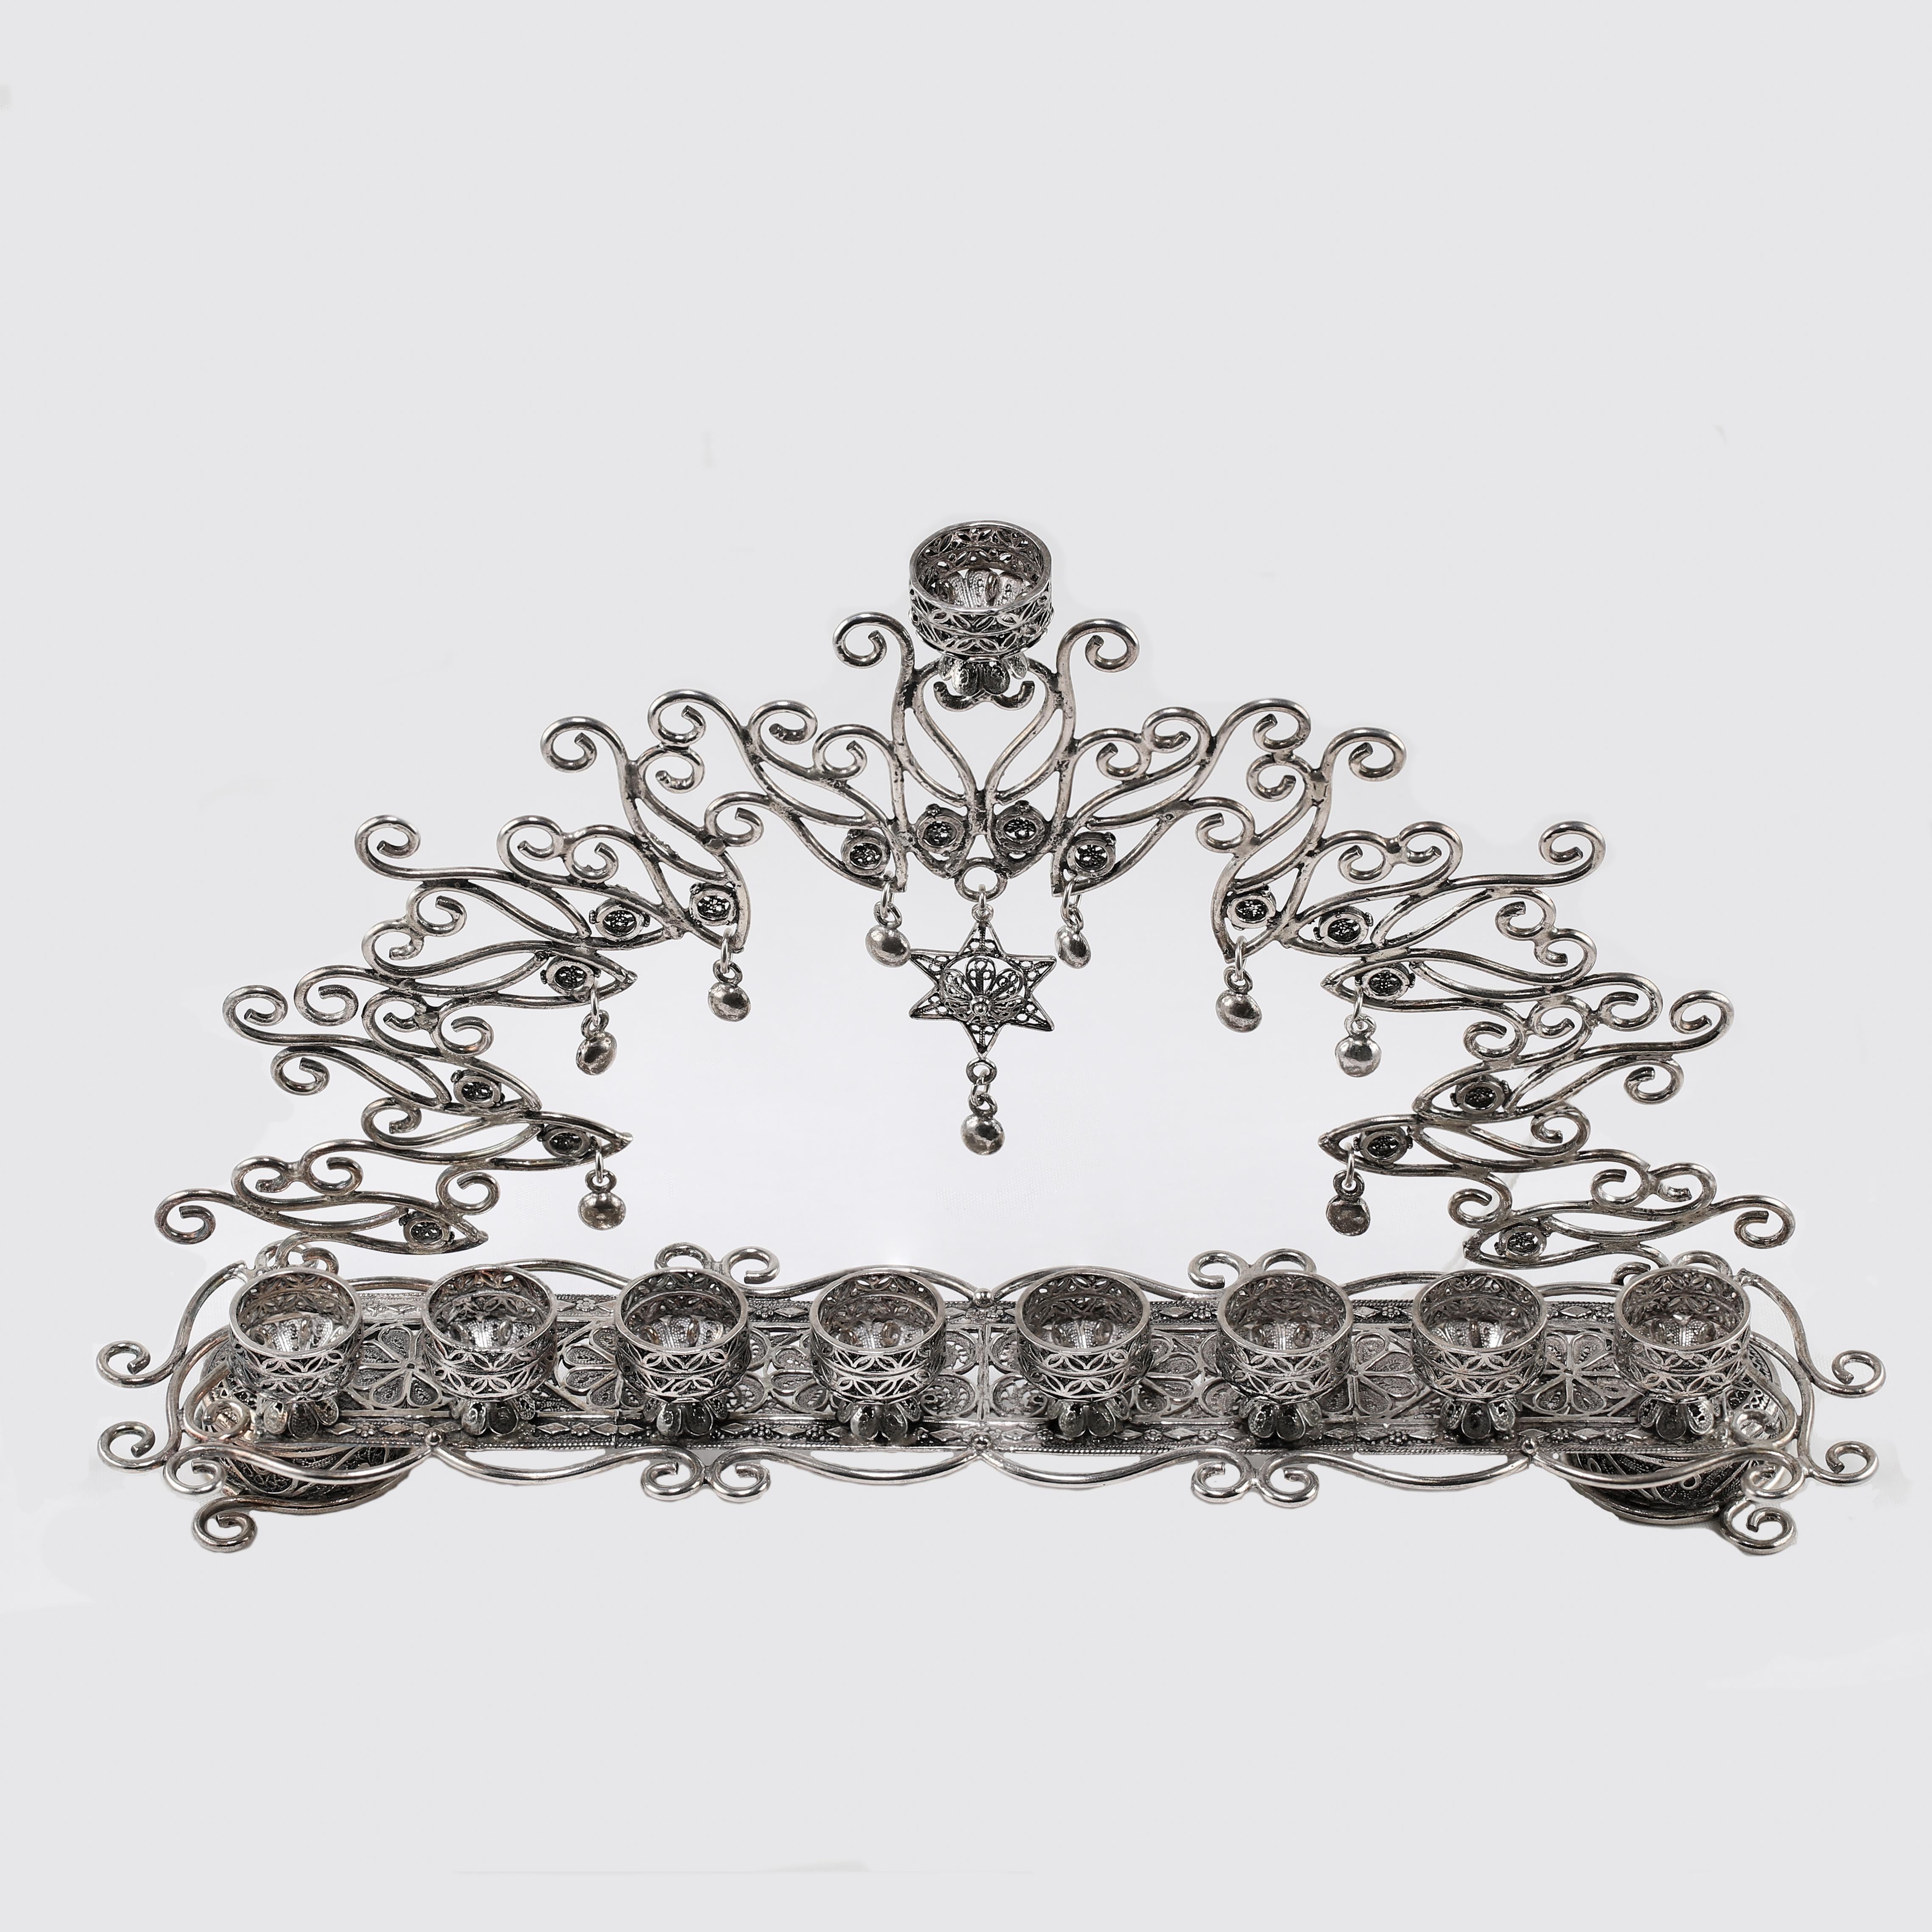 Whimsical Menorah for Hanukkah. A beautiful piece that is all handcrafted with Solid Sterling Silver in Israel with fine yemenite workmanship that was created 100’s of years ago. The Yemenite filigree technique is all hand done, and still practiced